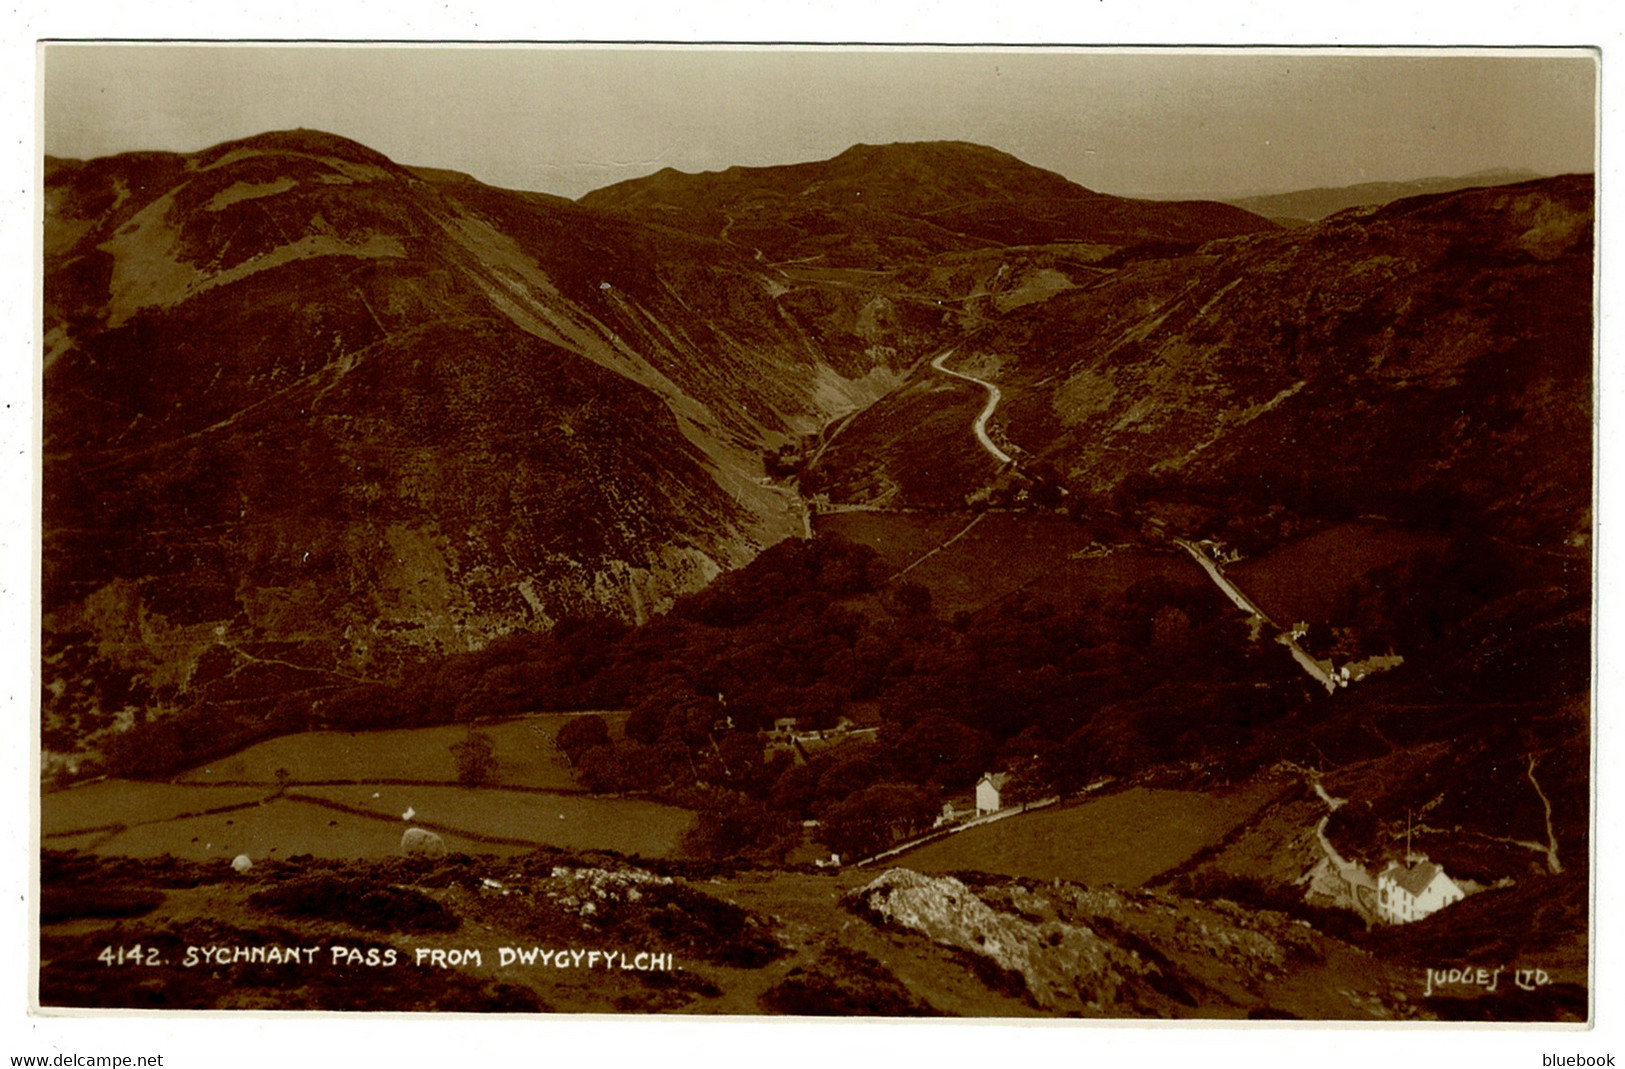 Ref 1489 - Judges Real Photo Postcard - Sychnant Pass From Dwygyflchi - Wales - Caernarvonshire